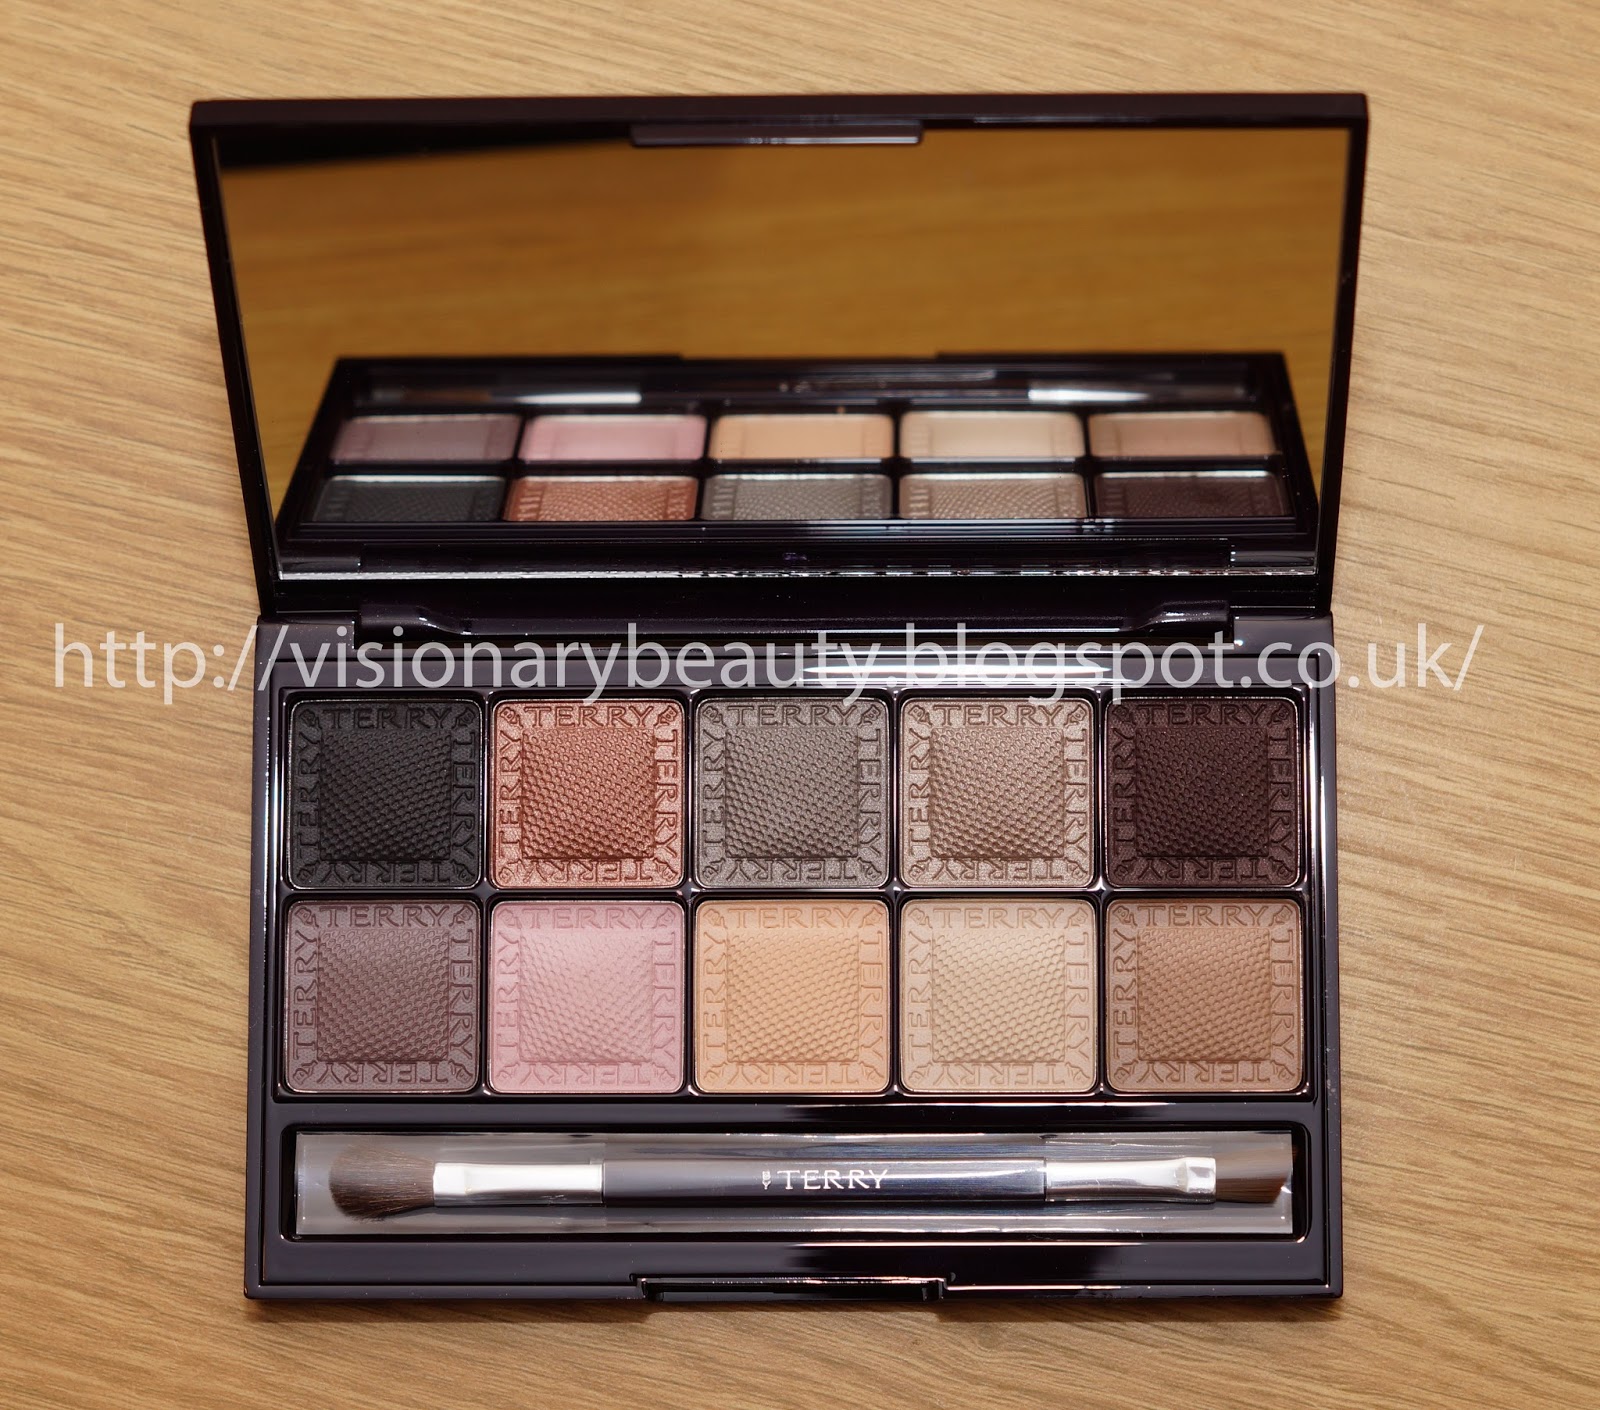 Visionary Beauty: By Terry New Eye Designer Palette Smoky Nude